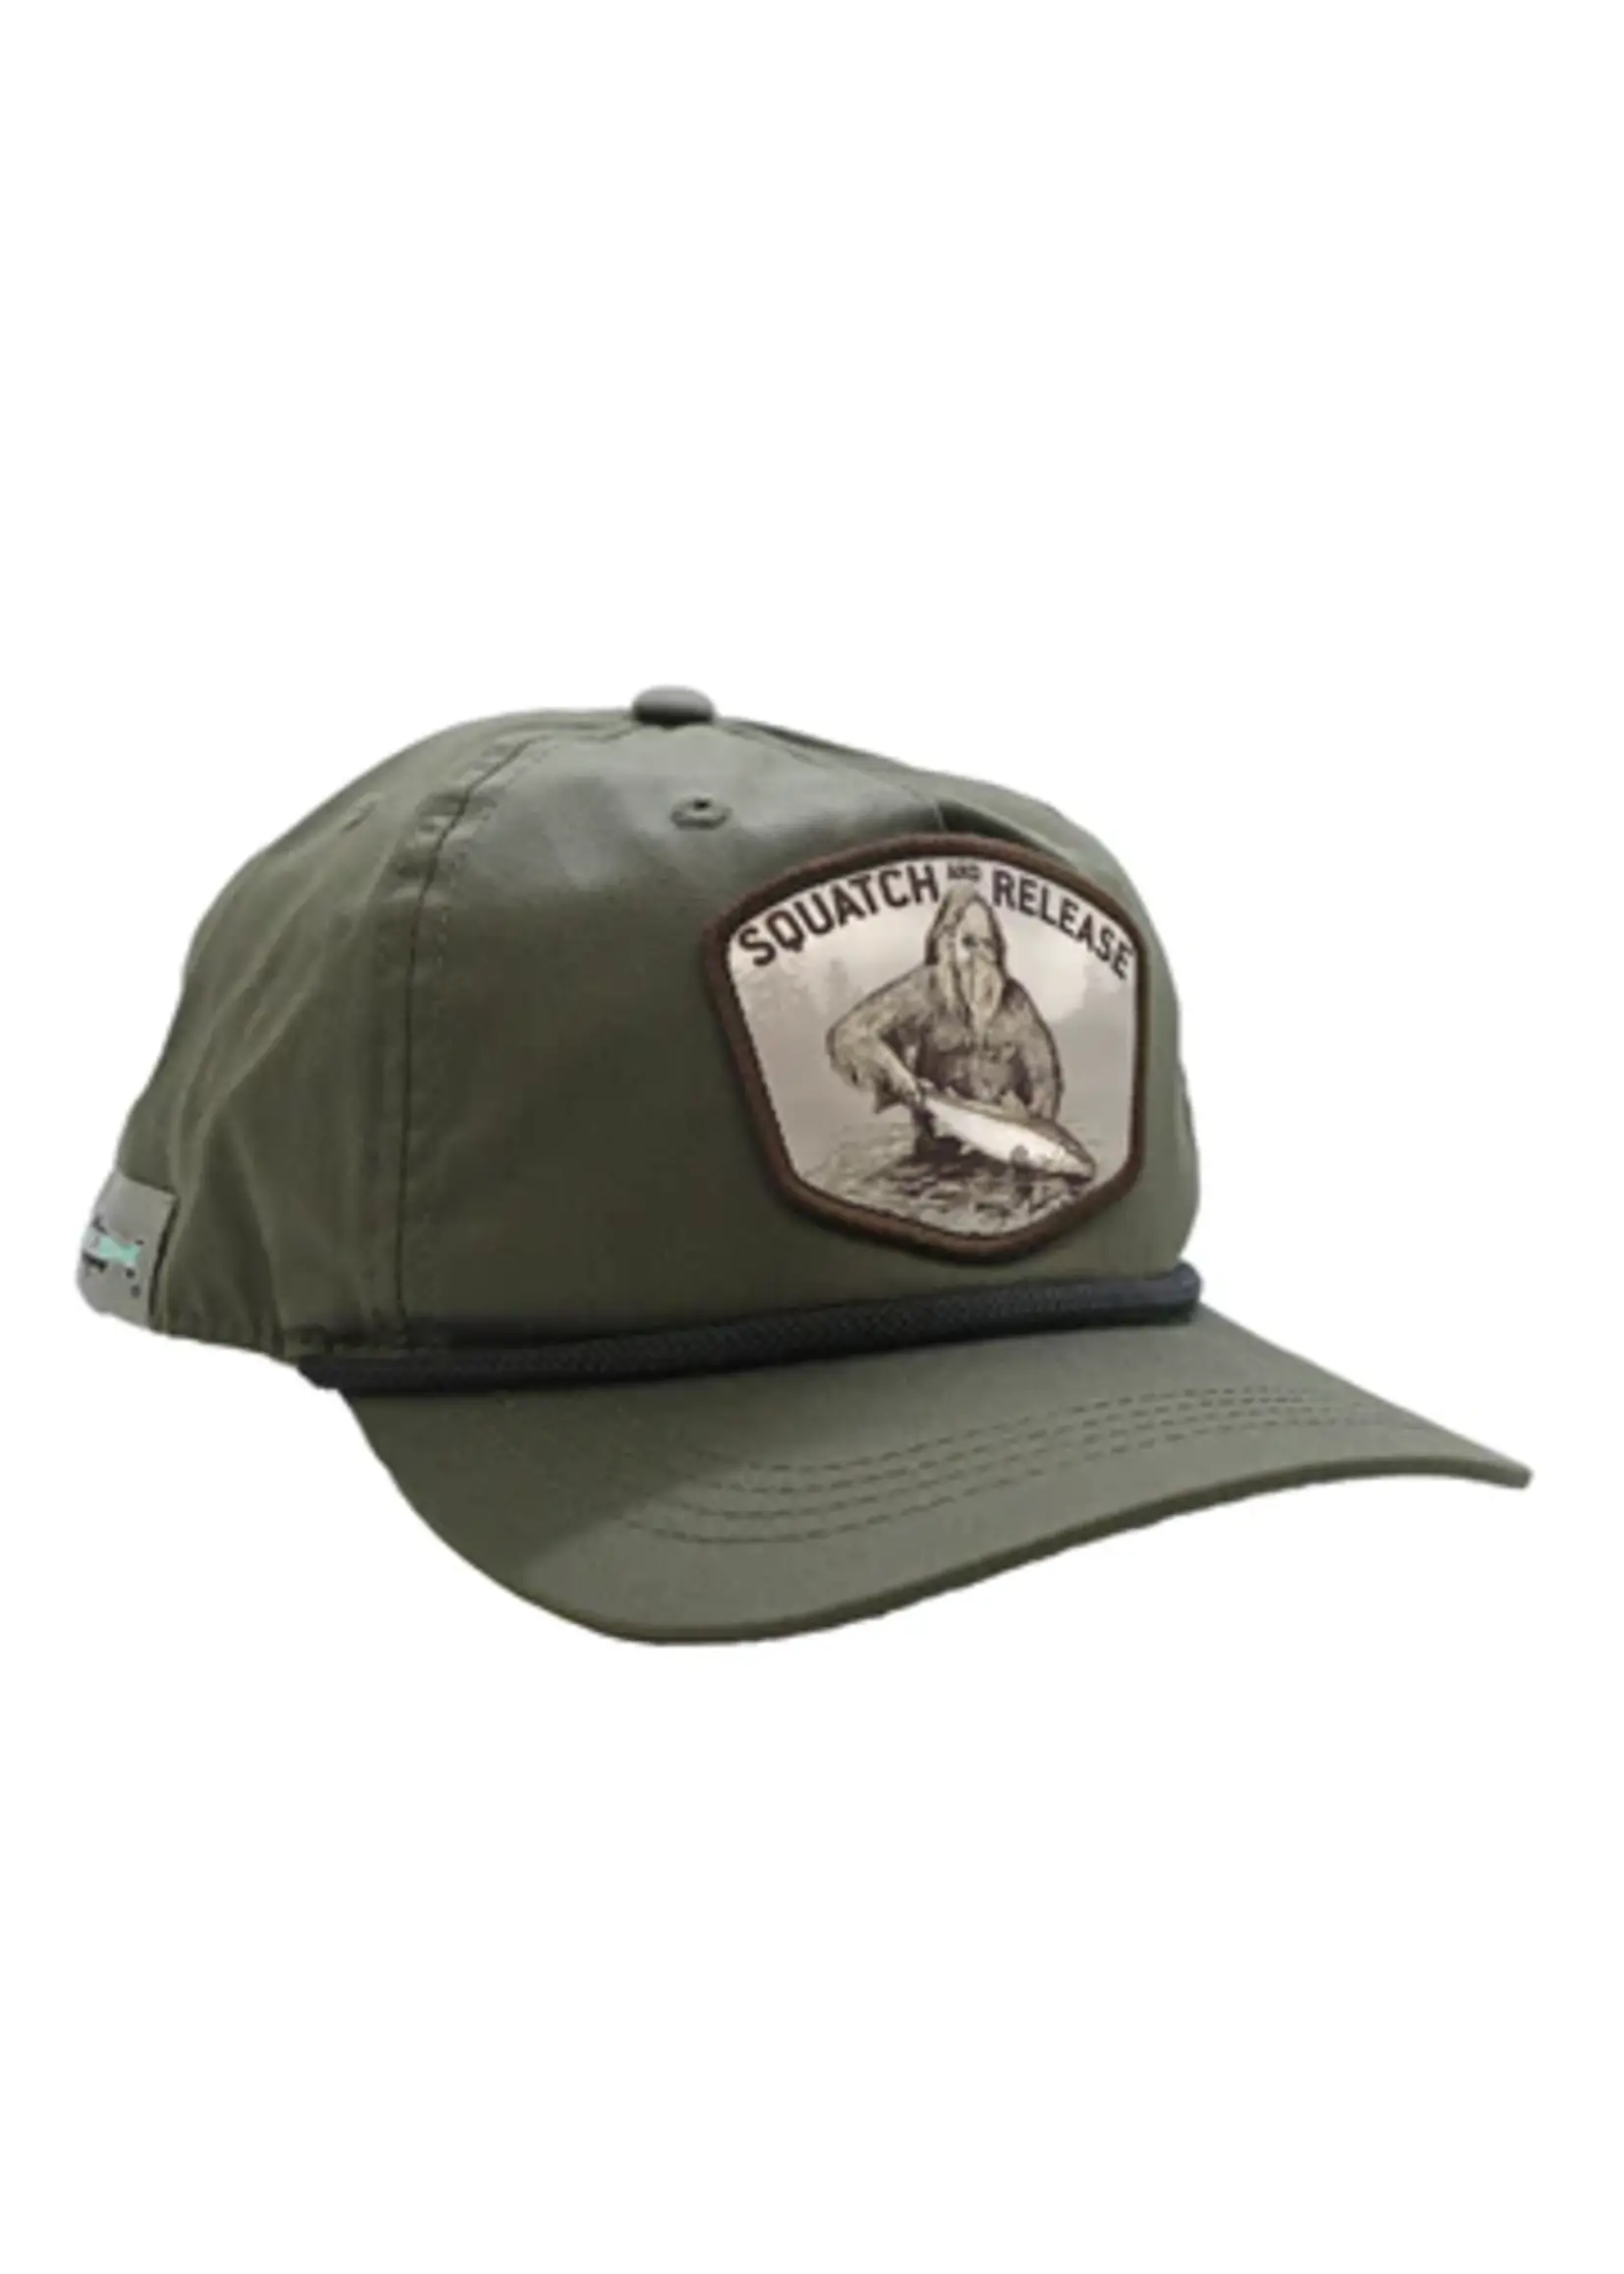 Rep Your Water RepYourWater Squatch and Release Badge Unstructured Hat